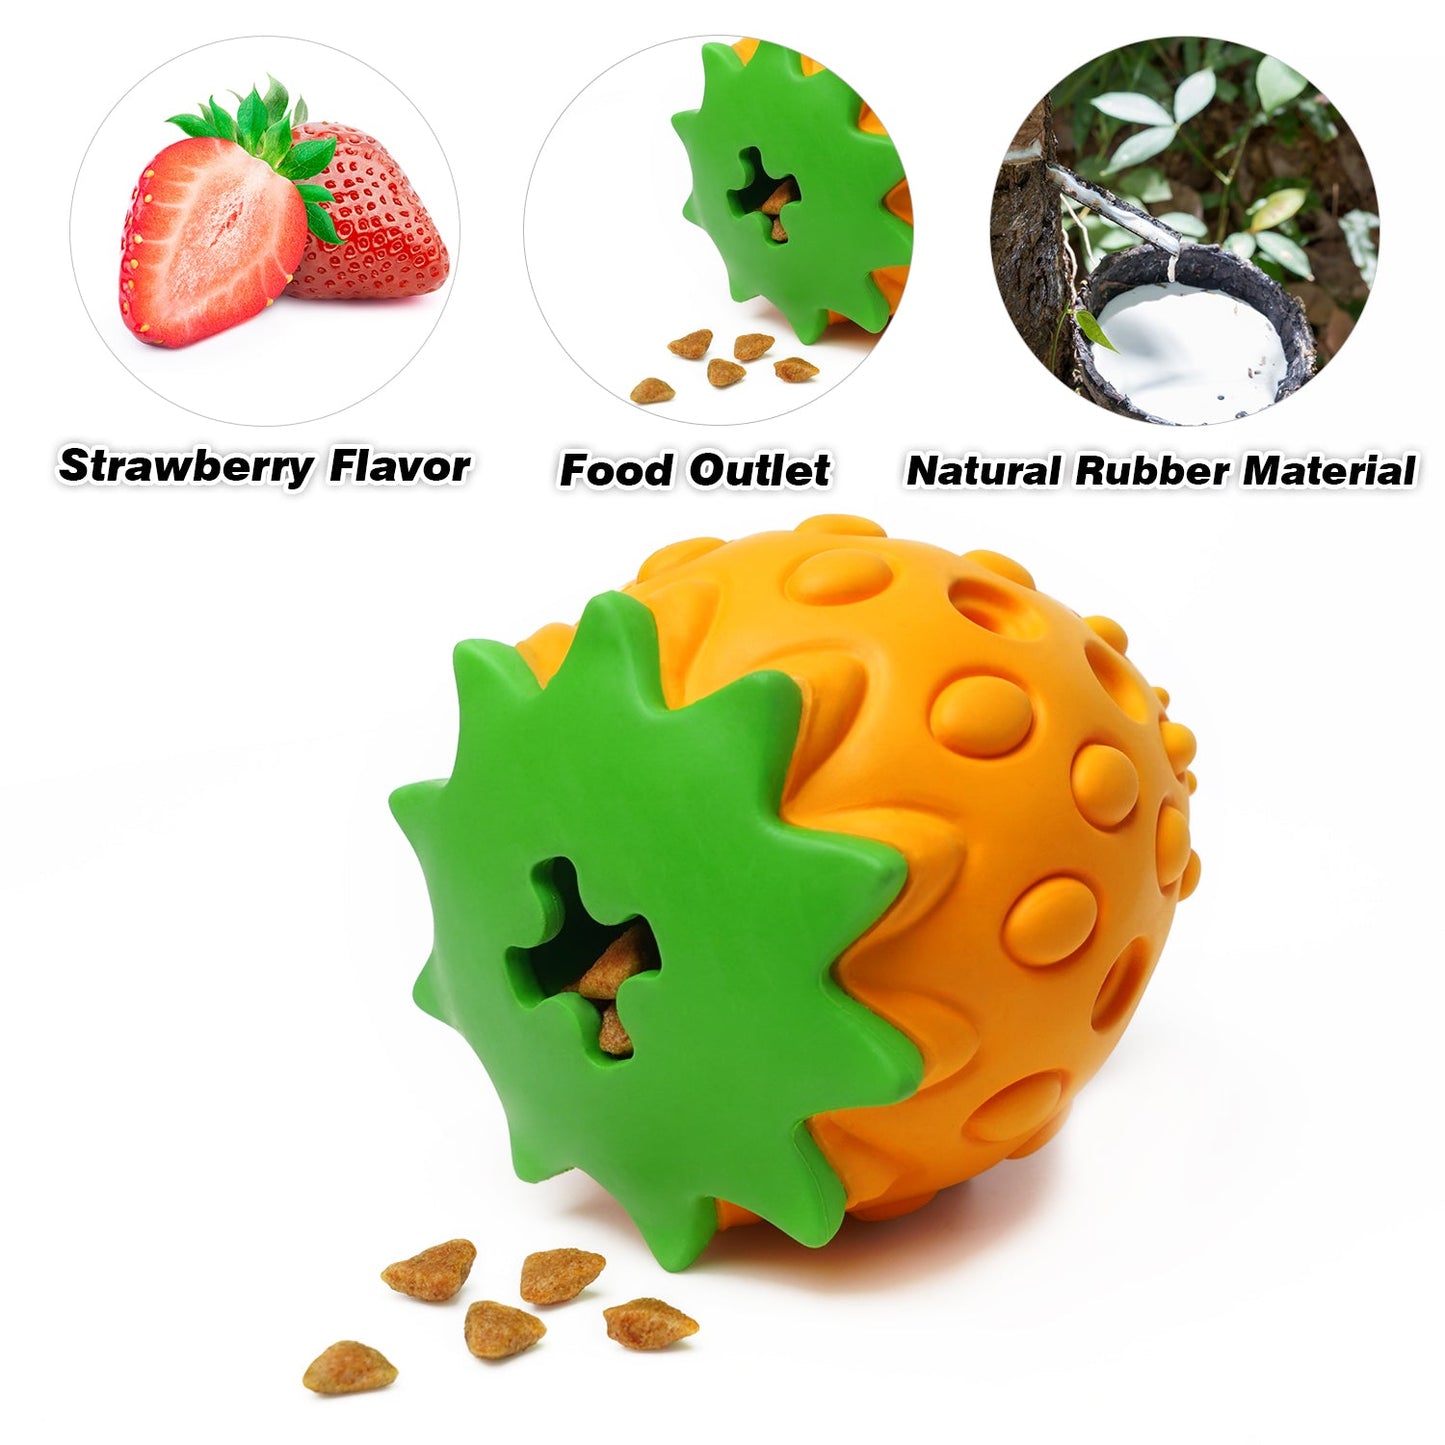 Beniqu 100% Safe Natural Rubber Dog Leaky Food Chew Toy